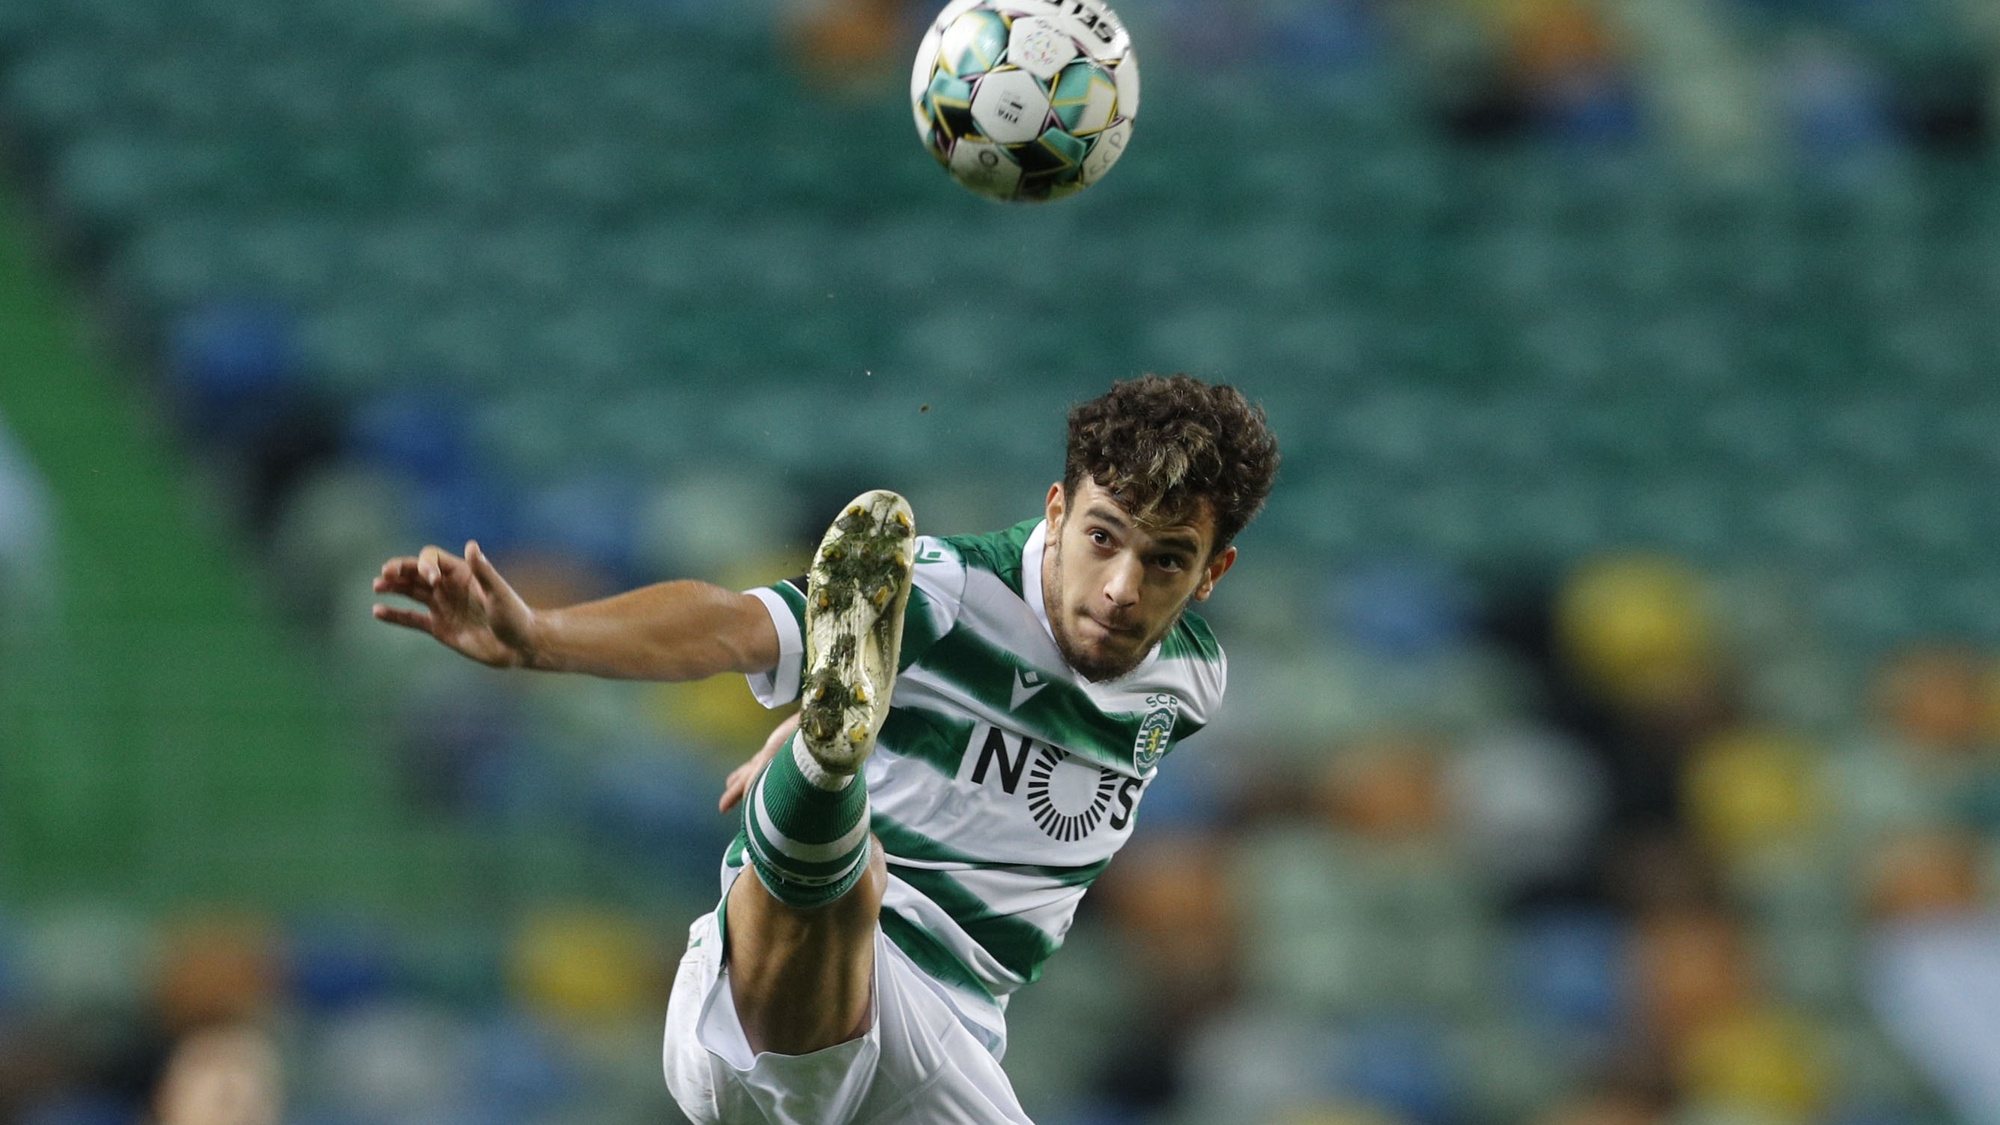 Sporting´s Pedro Gonçalves in action during the Portuguese First League soccer match Sporting Lisbon vs CD Tondela at Alvalade Stadium in Lisbon, Portugal, 01 November 2020. ANTÓNIO COTRIM/LUSA